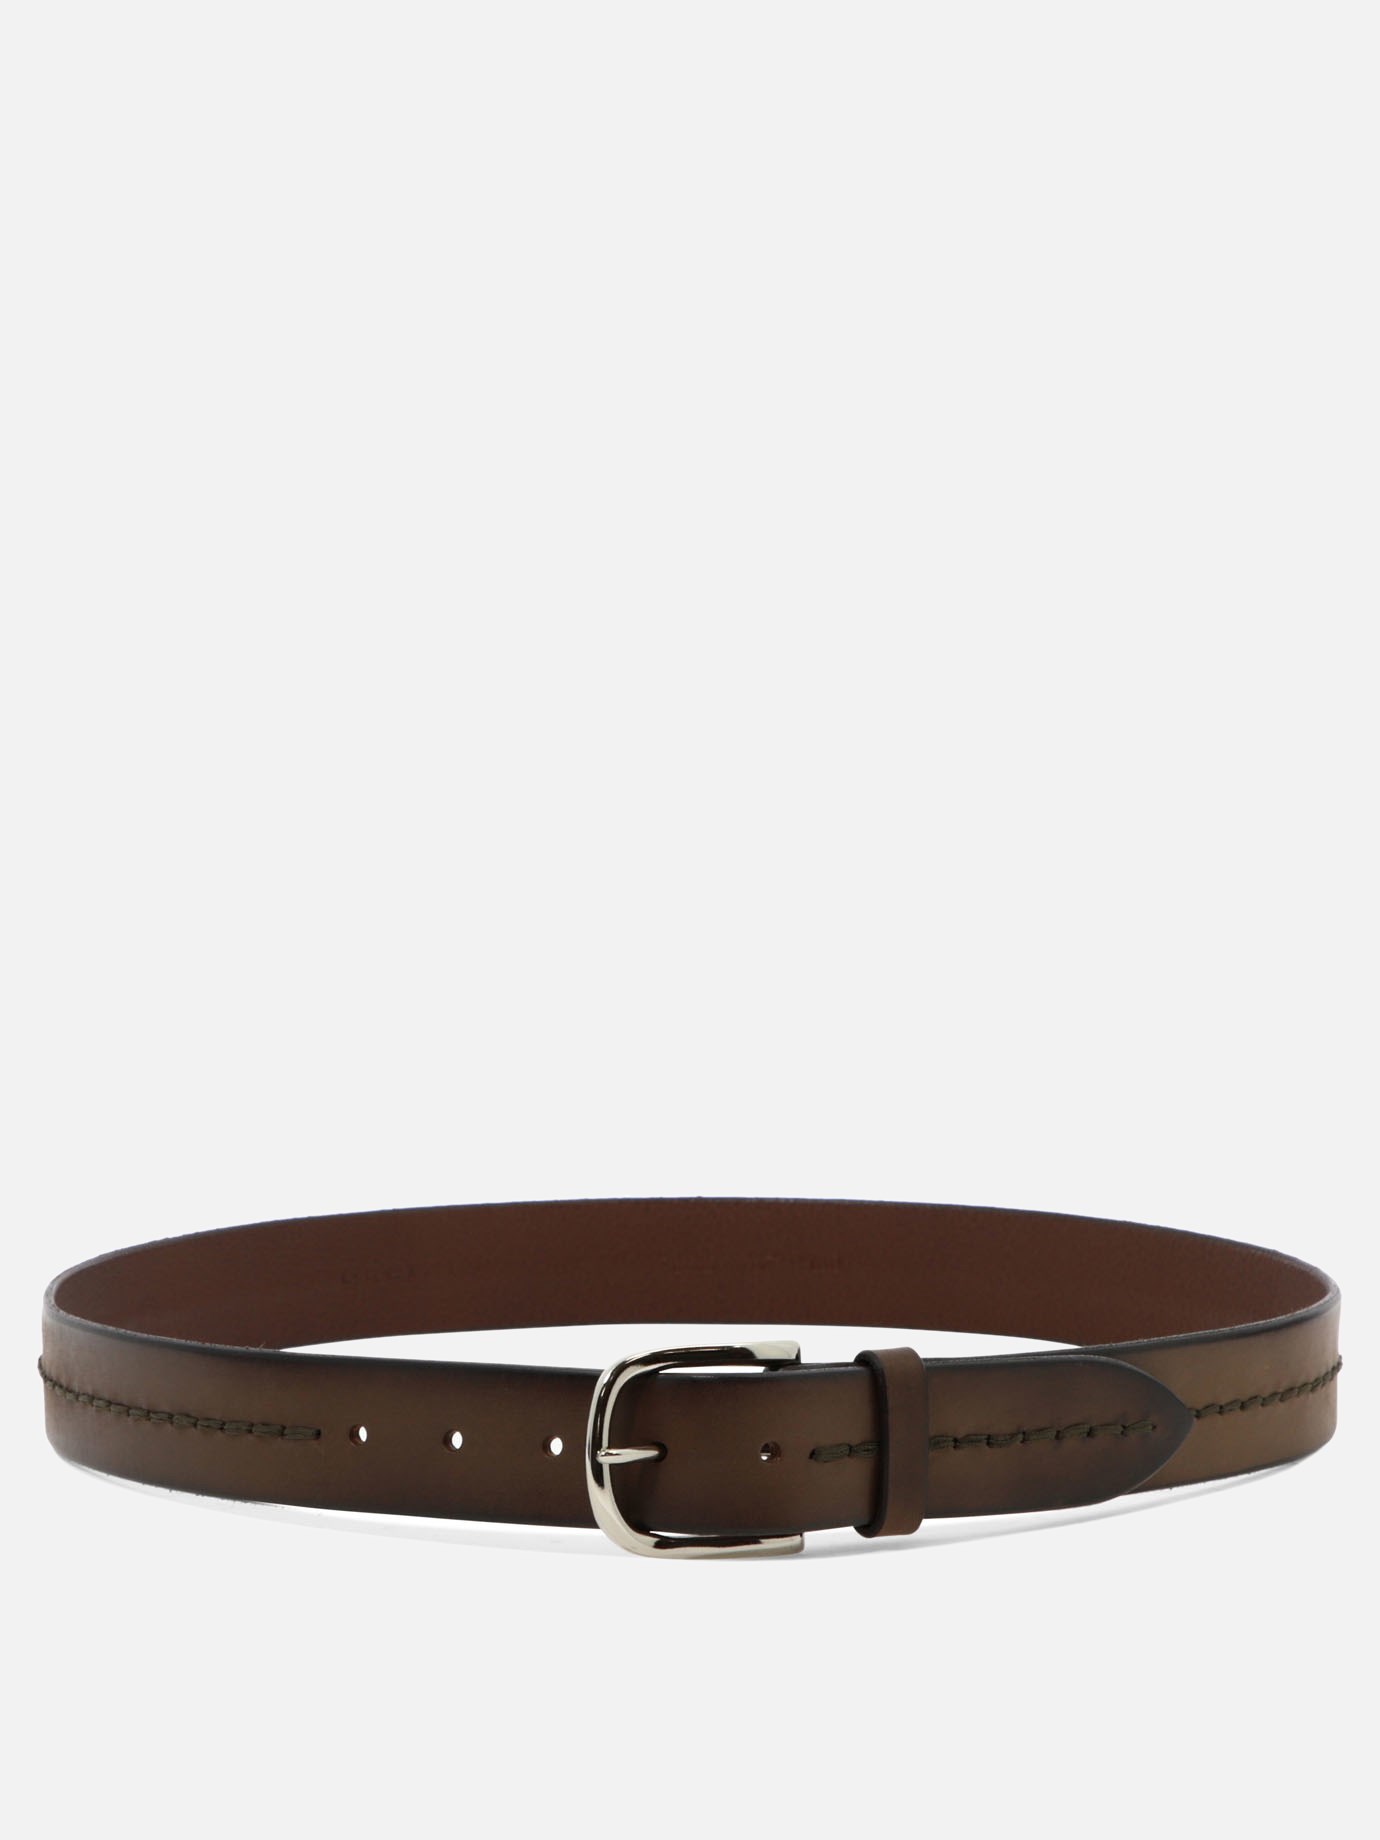 Brushed leather beltby Orciani - 0